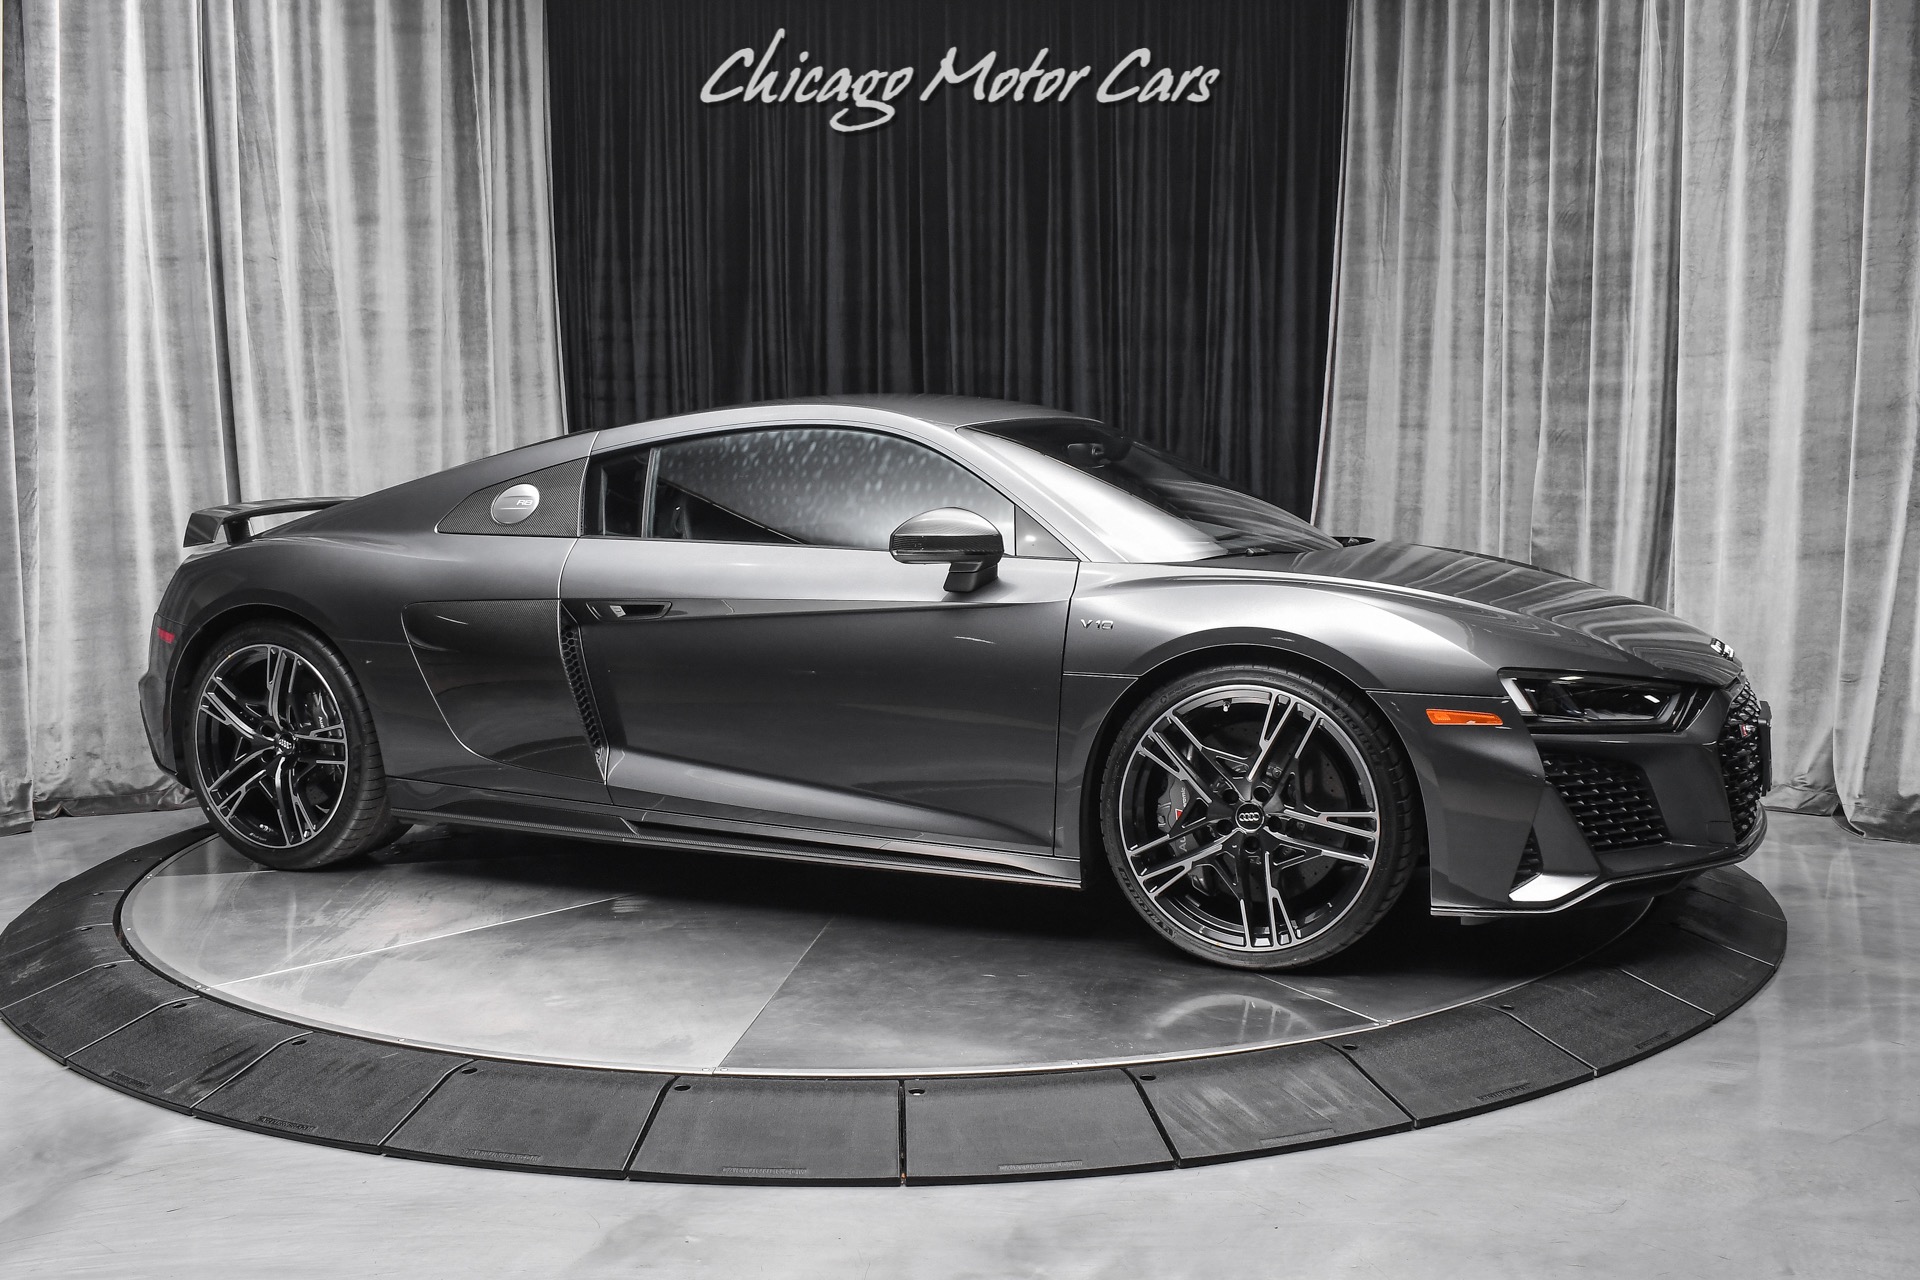 Used-2020-Audi-R8-52-quattro-V10-performance-Coupe-SPORT-PACK-DIAMOND-STITCHED-128-MILES